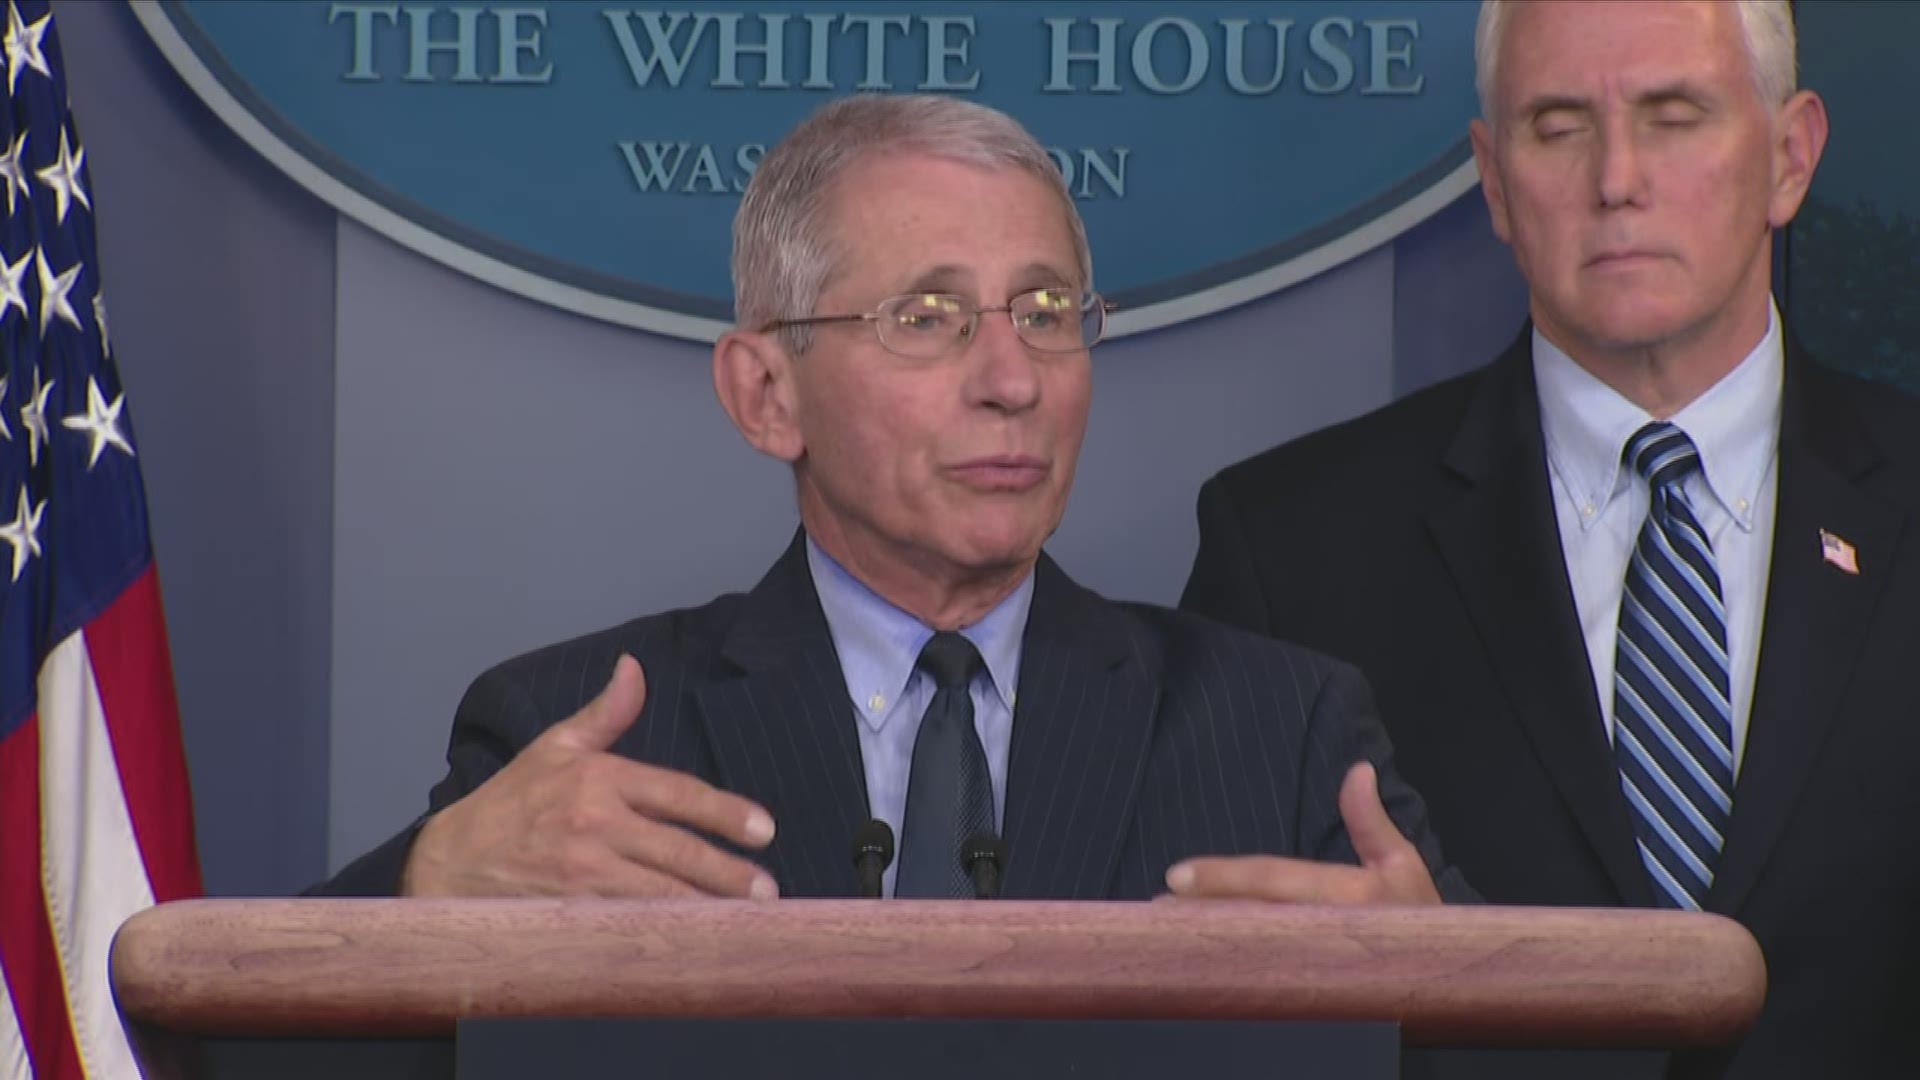 Dr. Fauci said life can start going back to normal when the curve is on the back end.